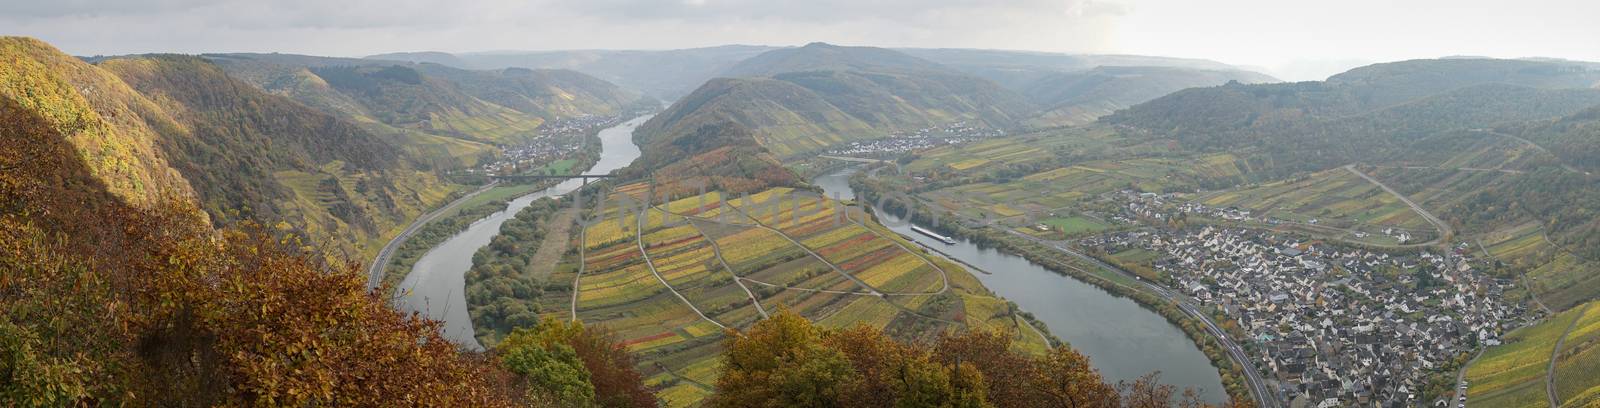 Moselle river loop on a dull autumnal day, Bremm, Germany, Europe